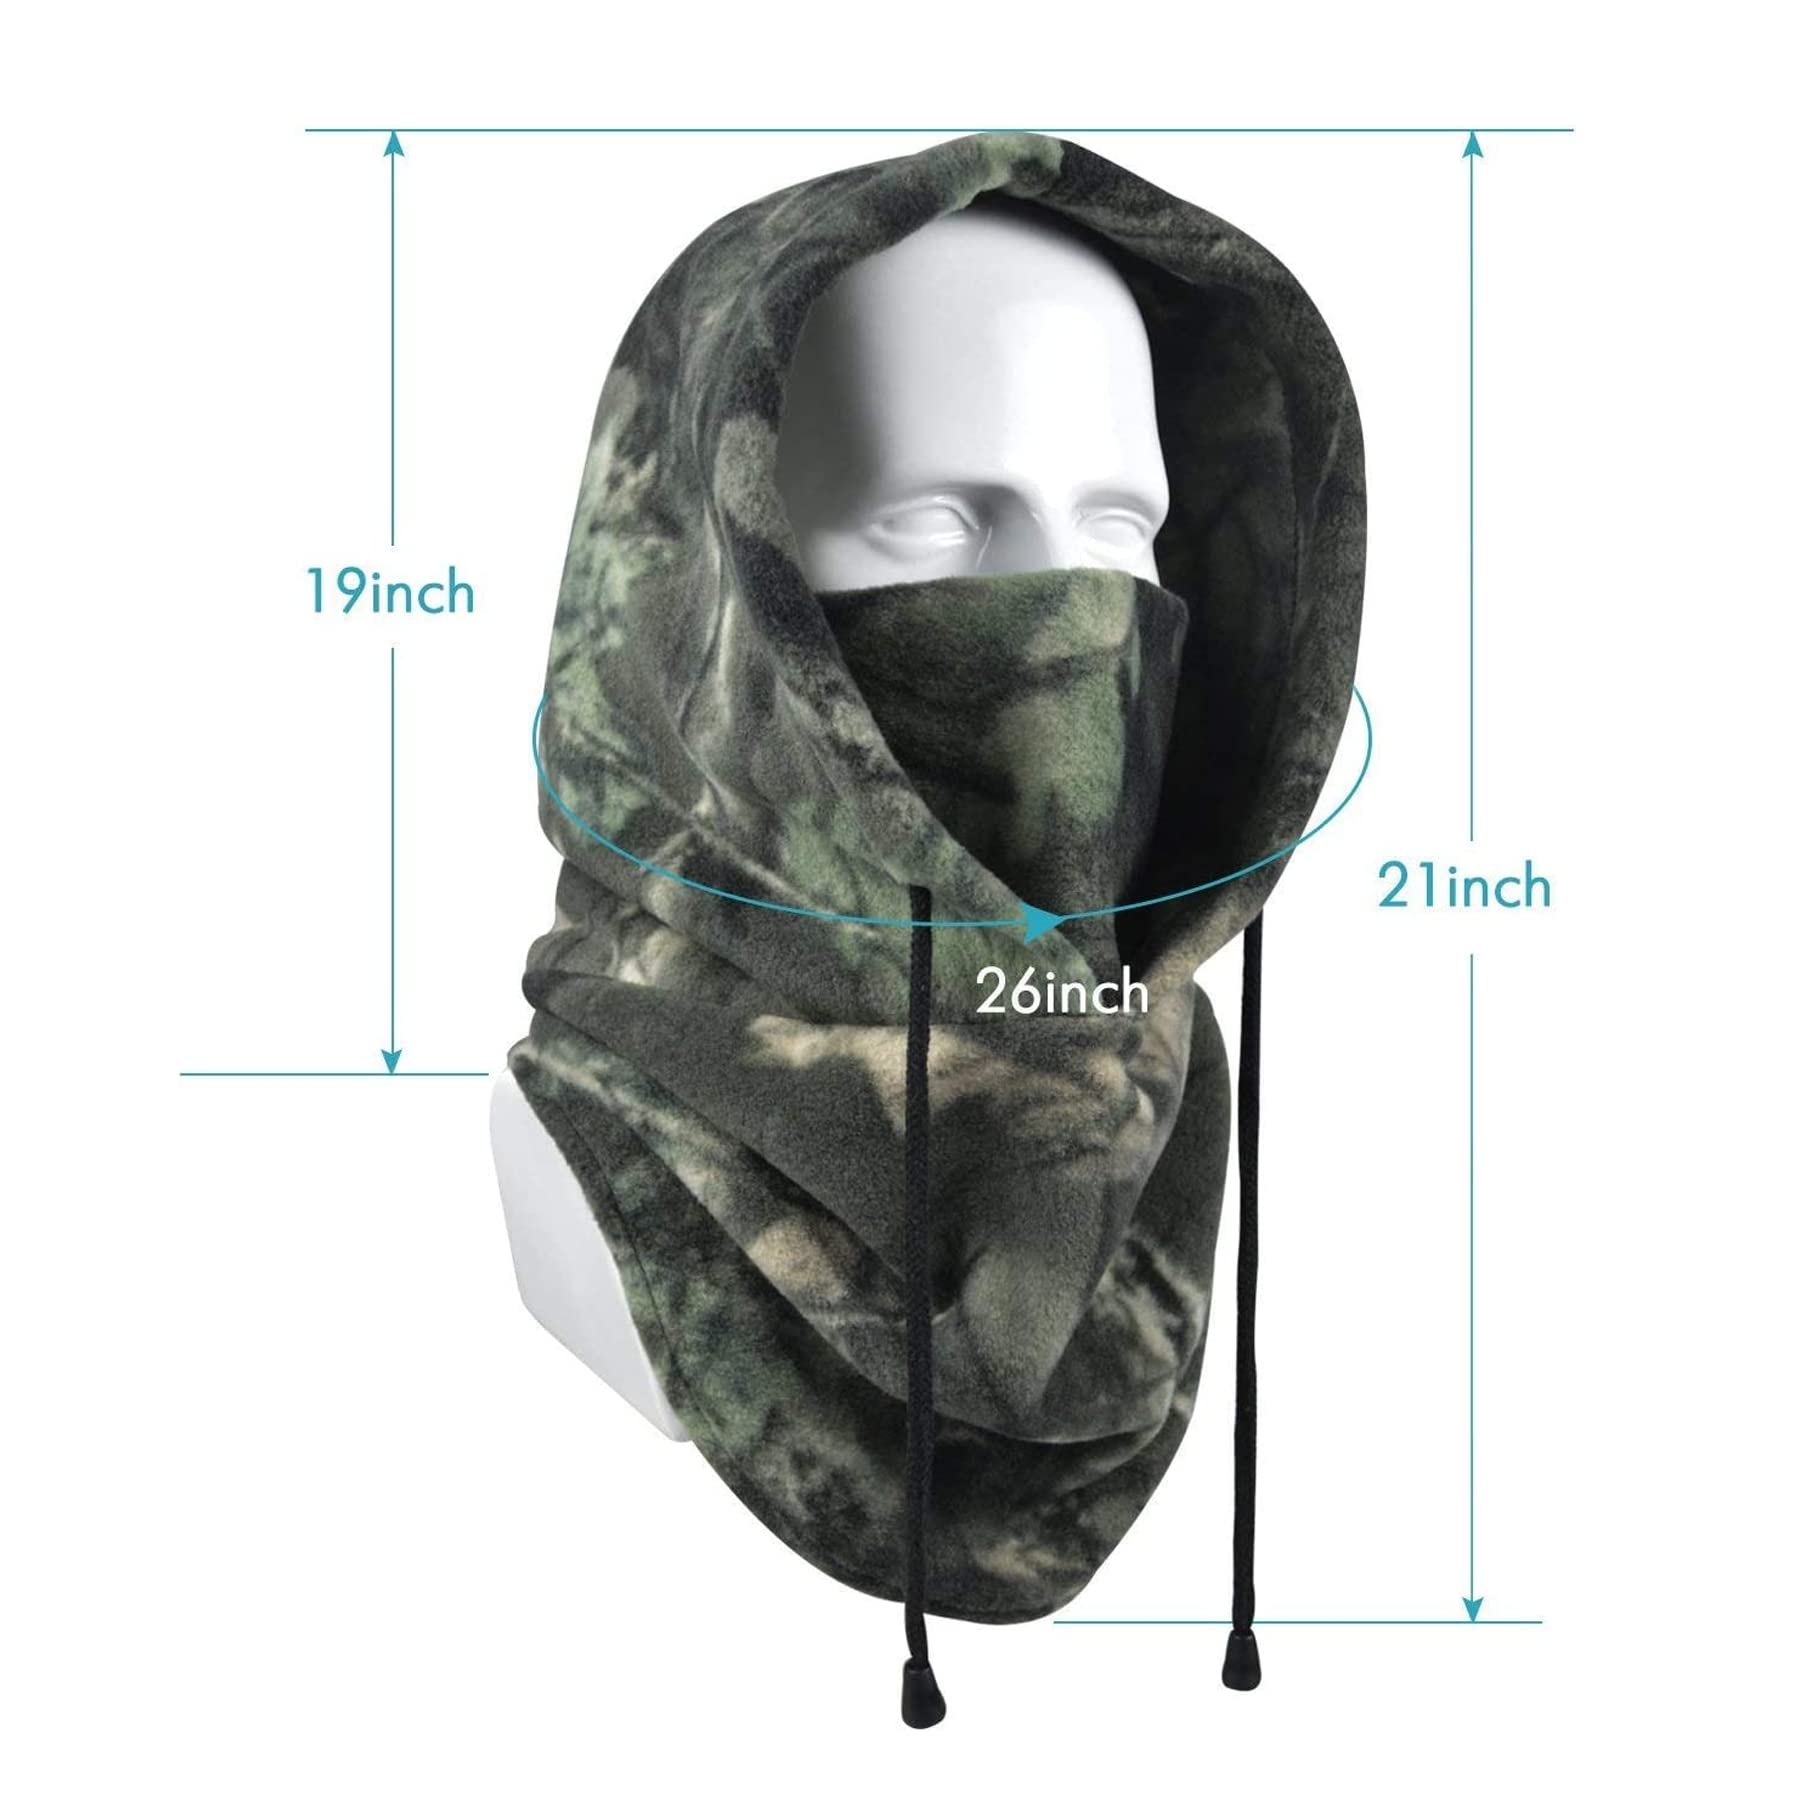 Your Choice Hunting Face Mask, Camo Balaclava Face Mask for Cold Weather, Hunting Gear Gifts for Men Women